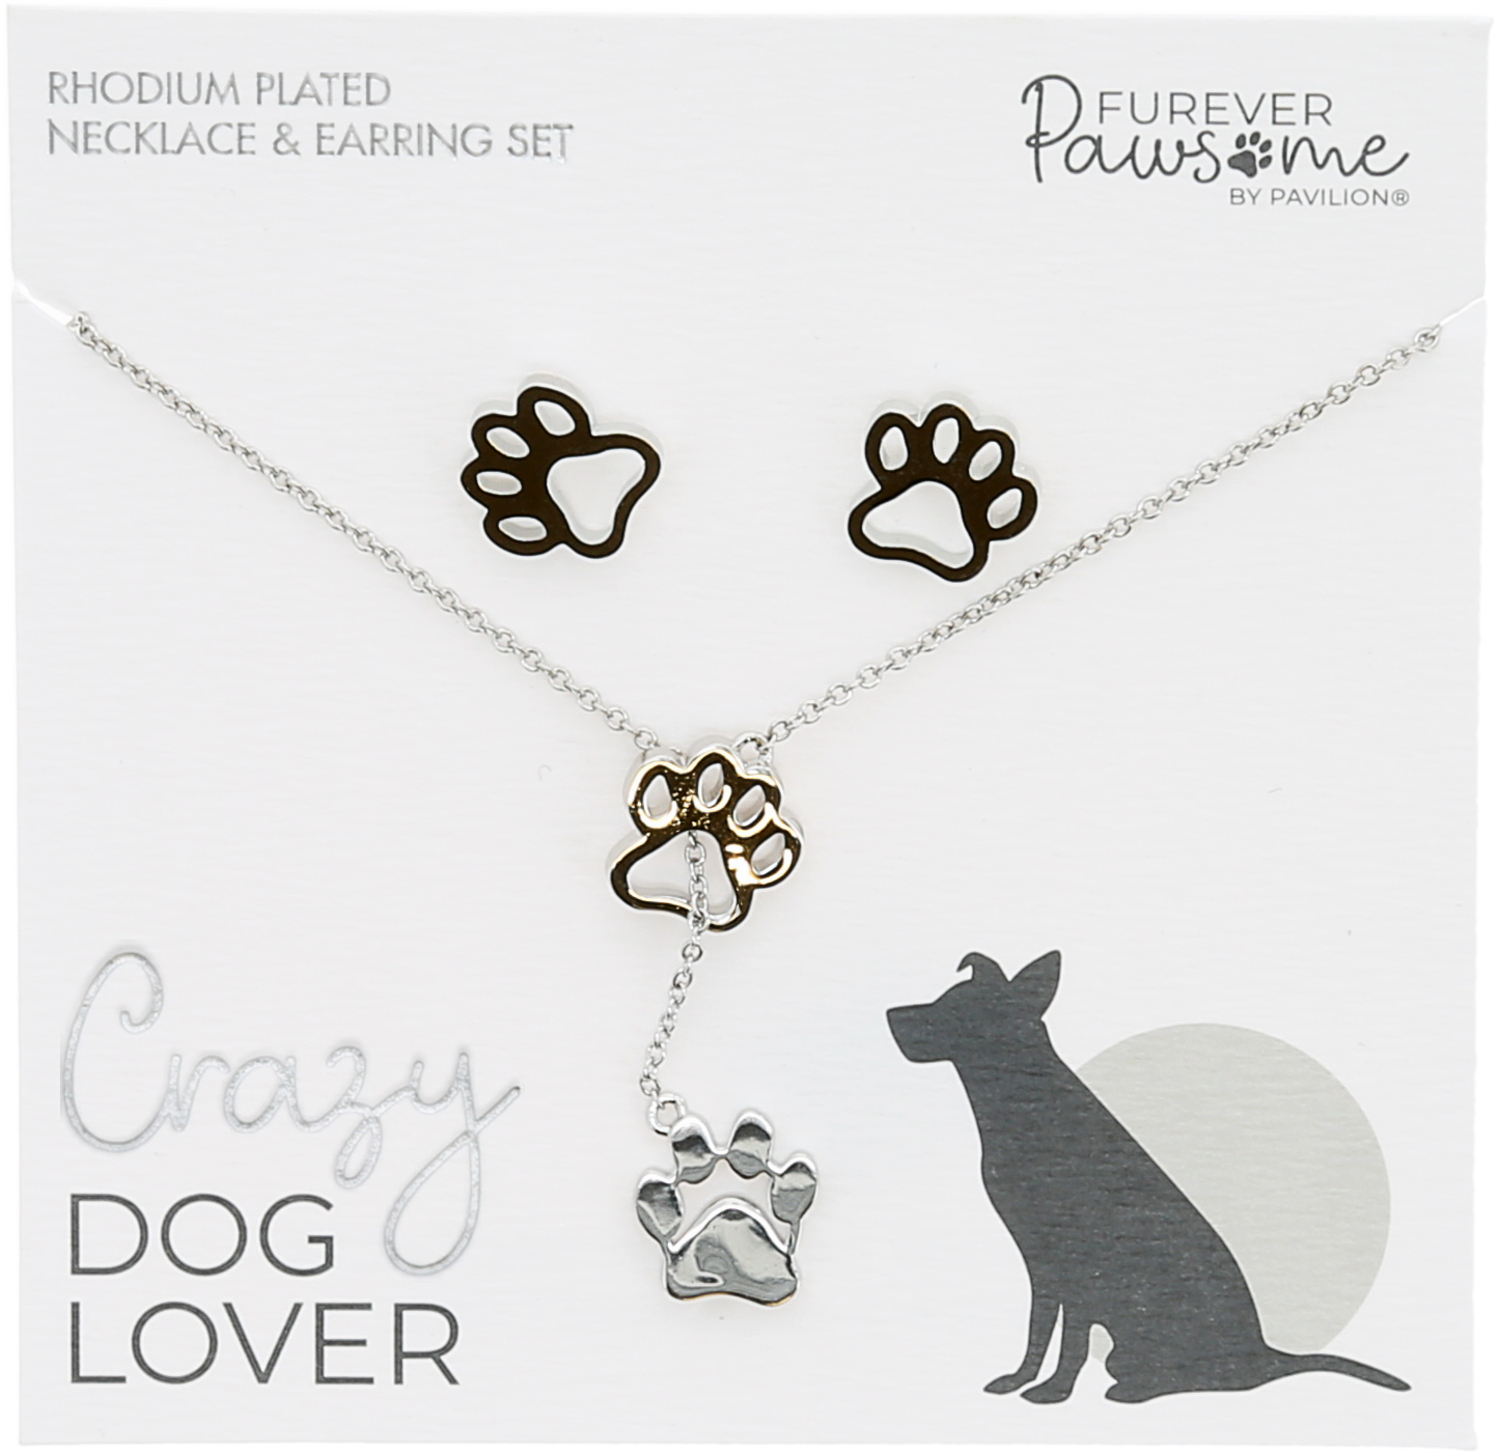 Dog Lover by Furever Pawsome - Dog Lover - Rhodium Plated Adjustable Necklace and Earring Set